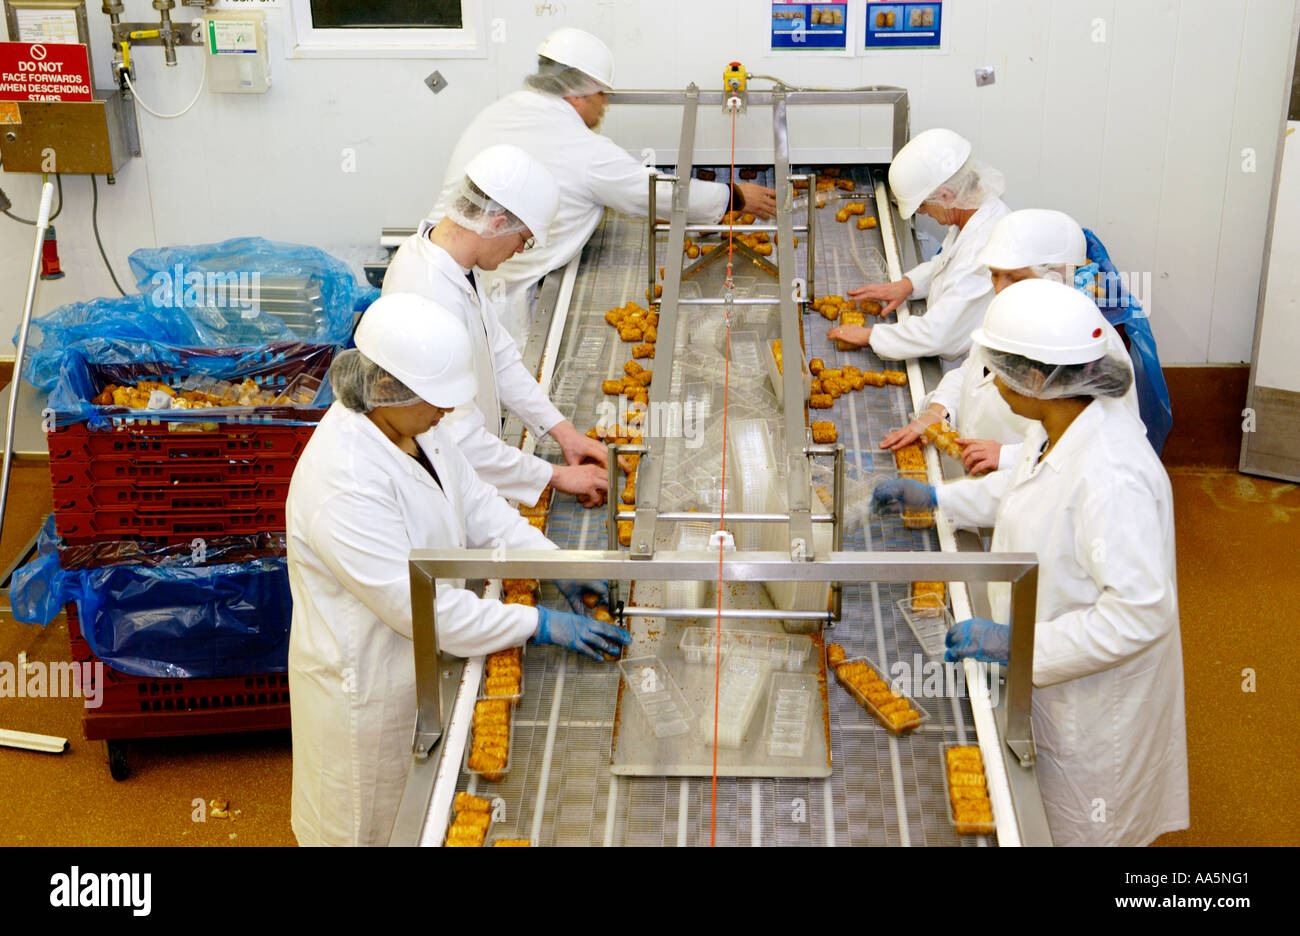 Potato Croquette production line at company making chilled ready meals in Newport South Wales UK GB Stock Photo